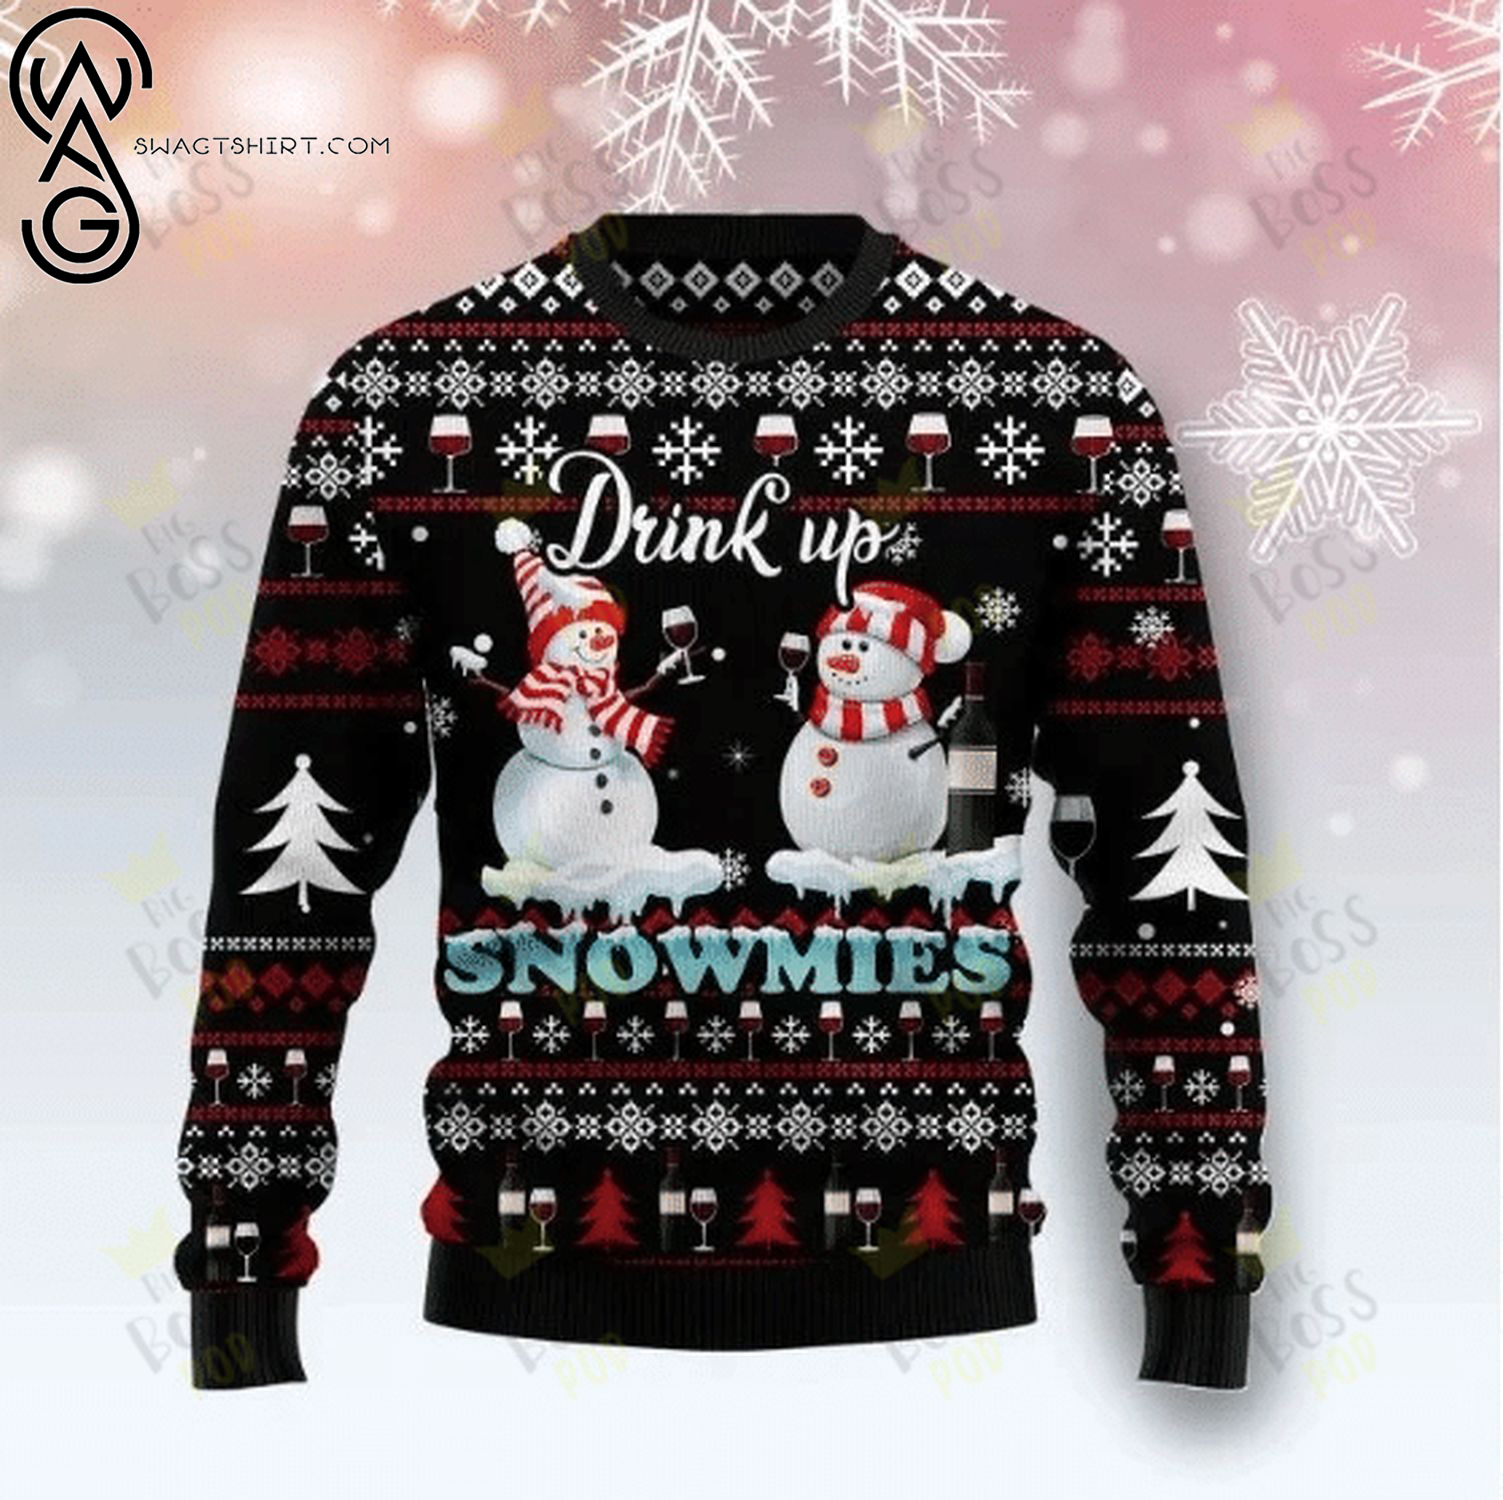 Drink up snowmies full printing ugly christmas sweater